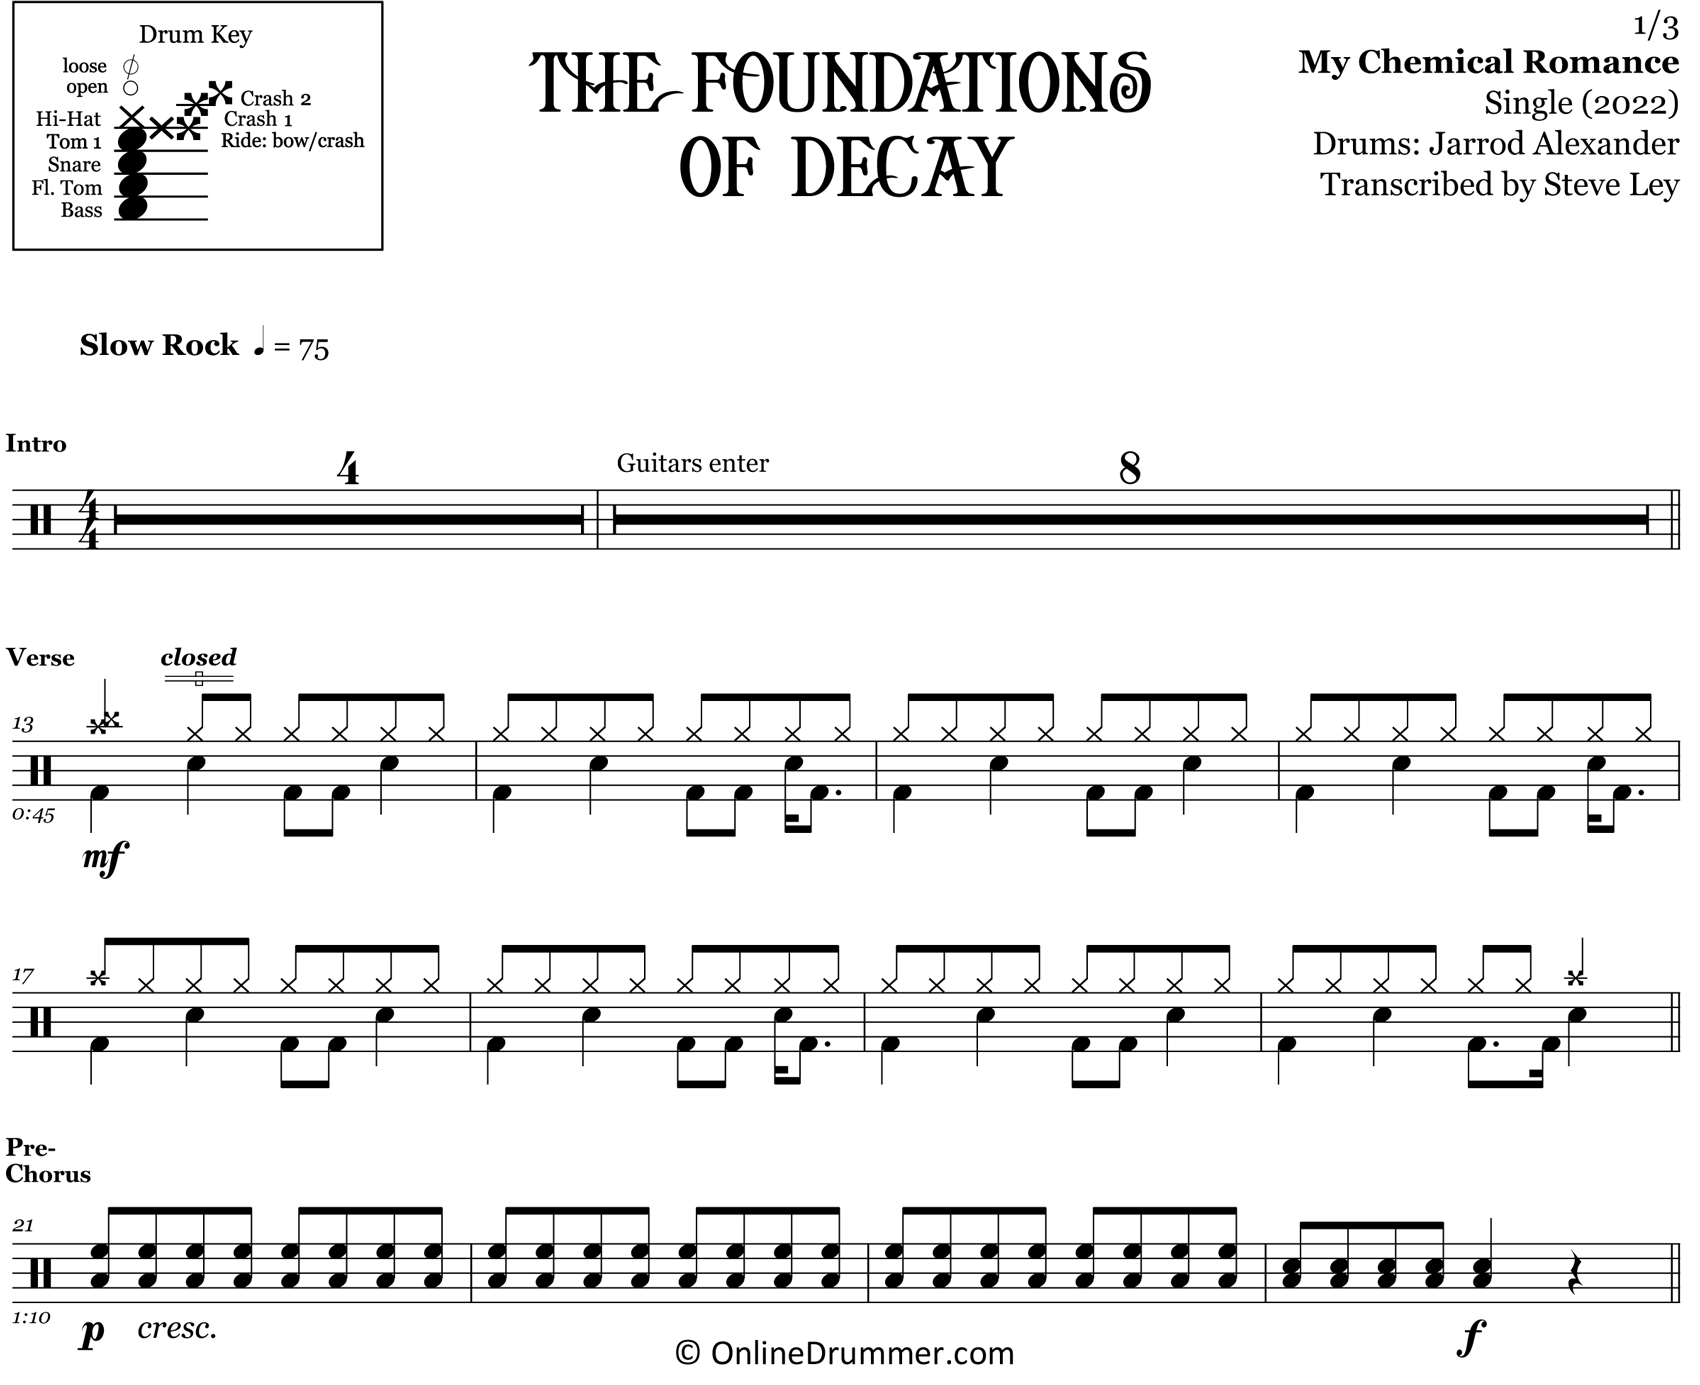 The Foundations of Decay - My Chemical Romance - Drum Sheet Music